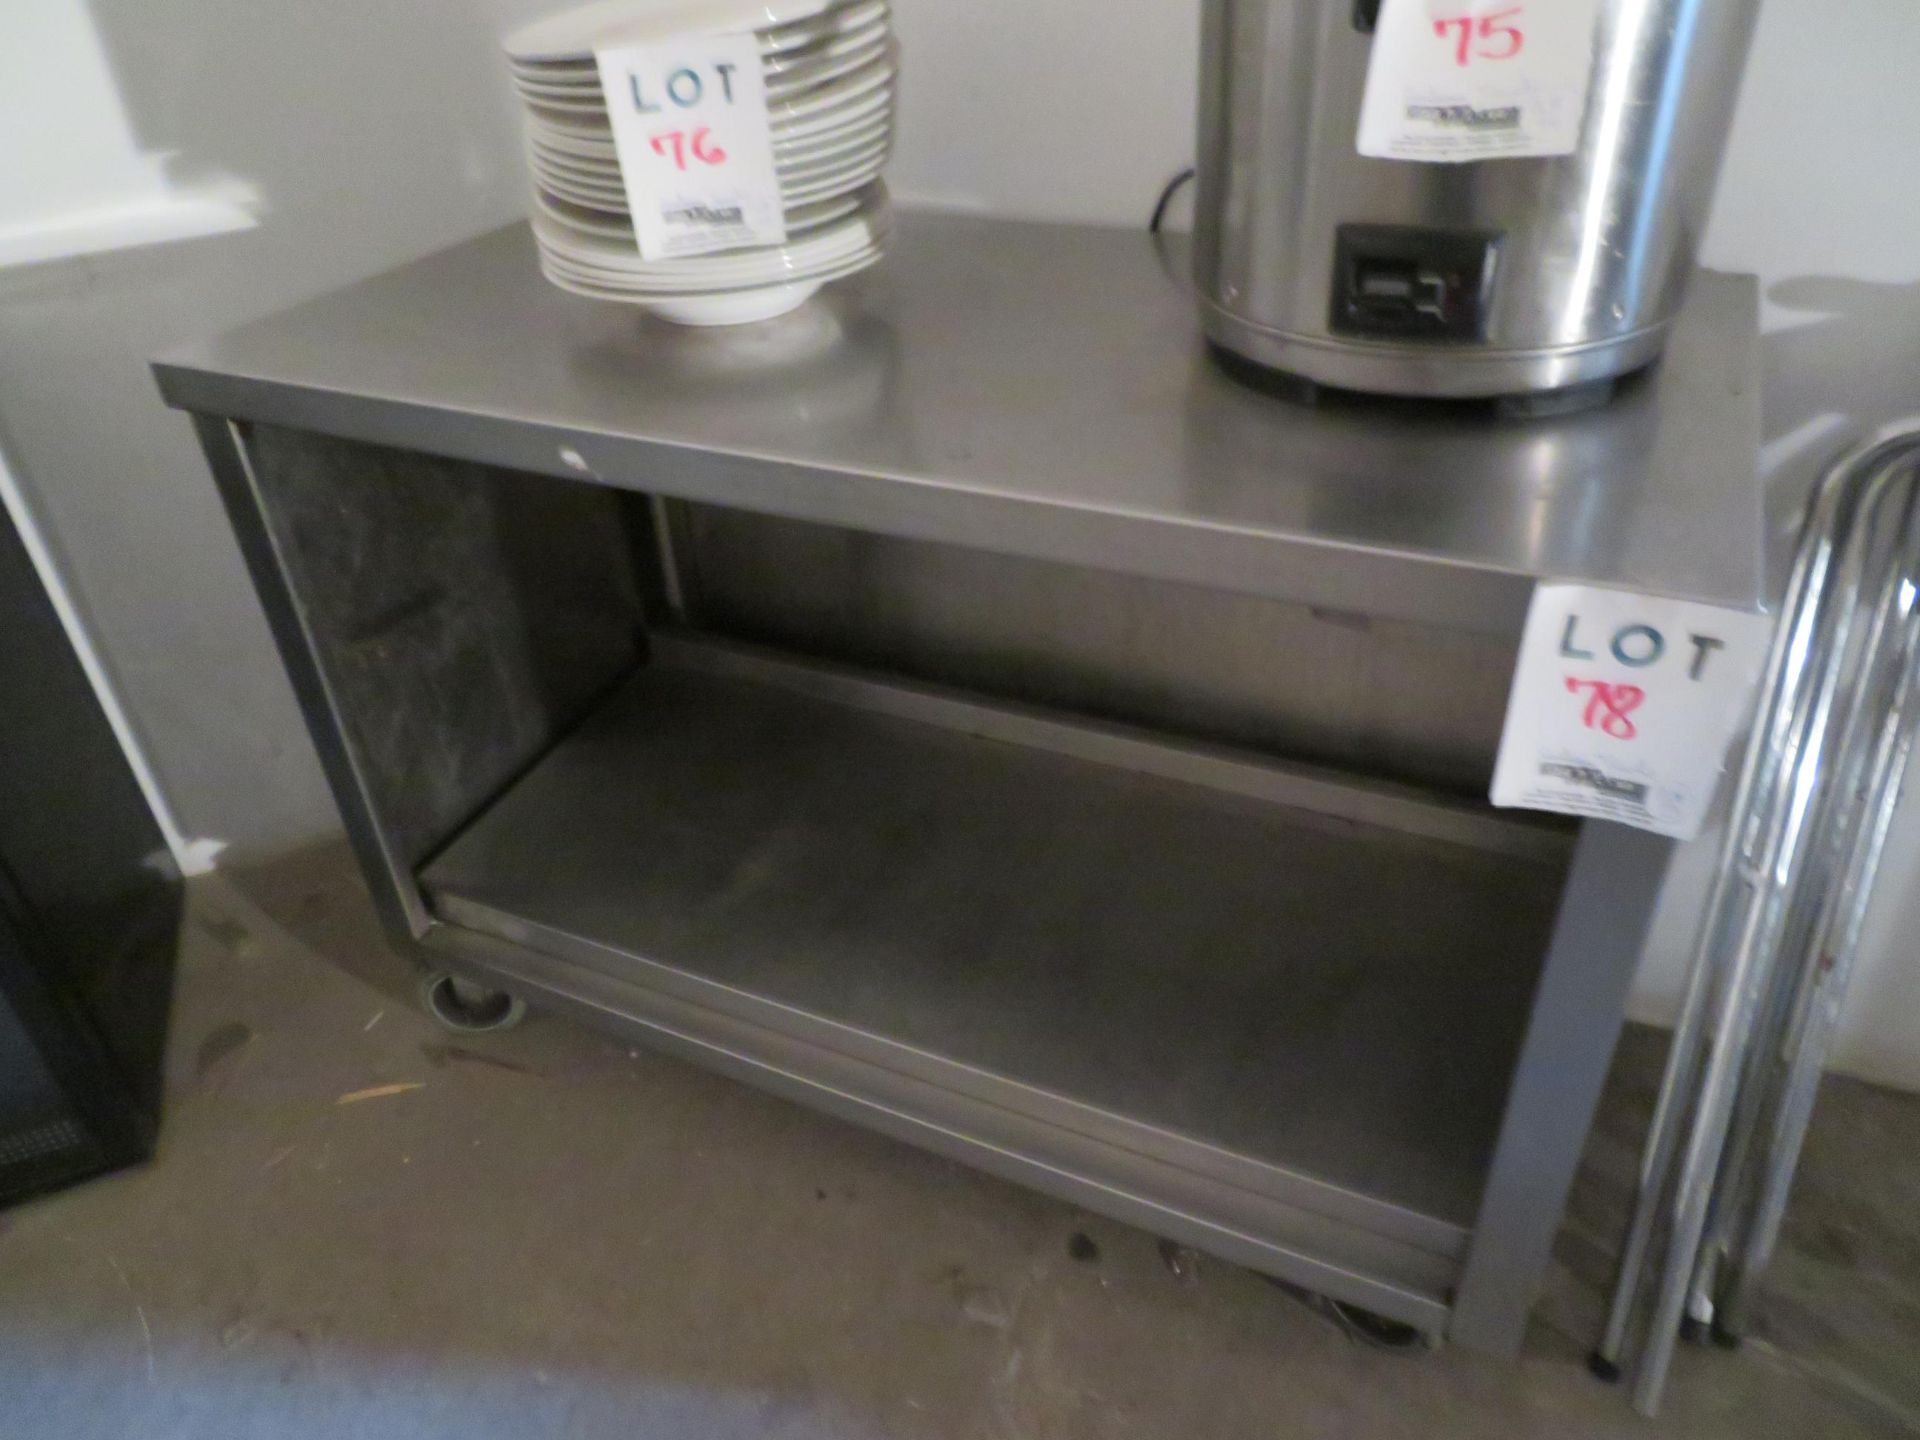 Stainless steel table/cabinet on wheels approx. 48"w x 24"d x 34"h